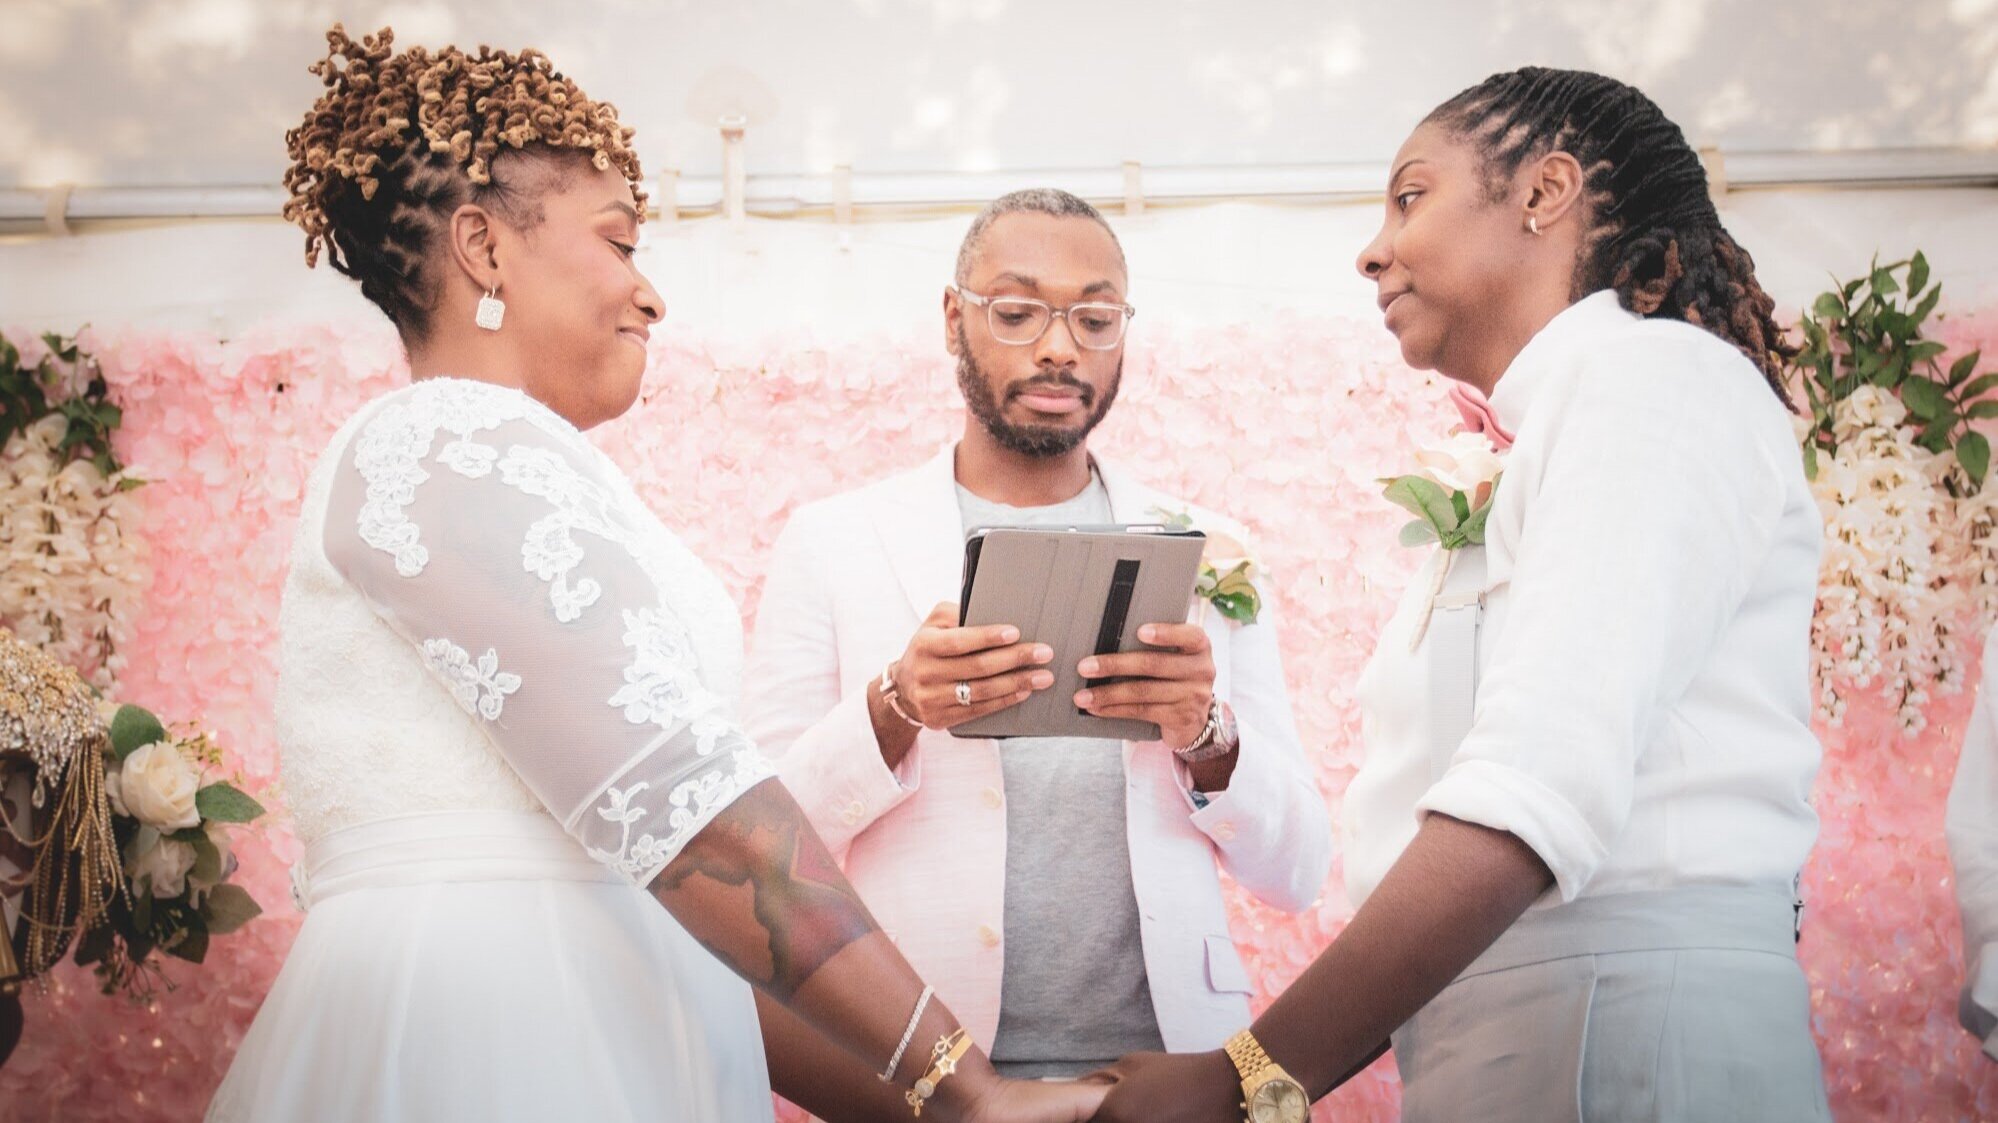 Black Women Are Marrying—Were Marrying Each Other Lesbian Marriage Grows as Black Women Defy Marriage Trends — The Reckoning image picture